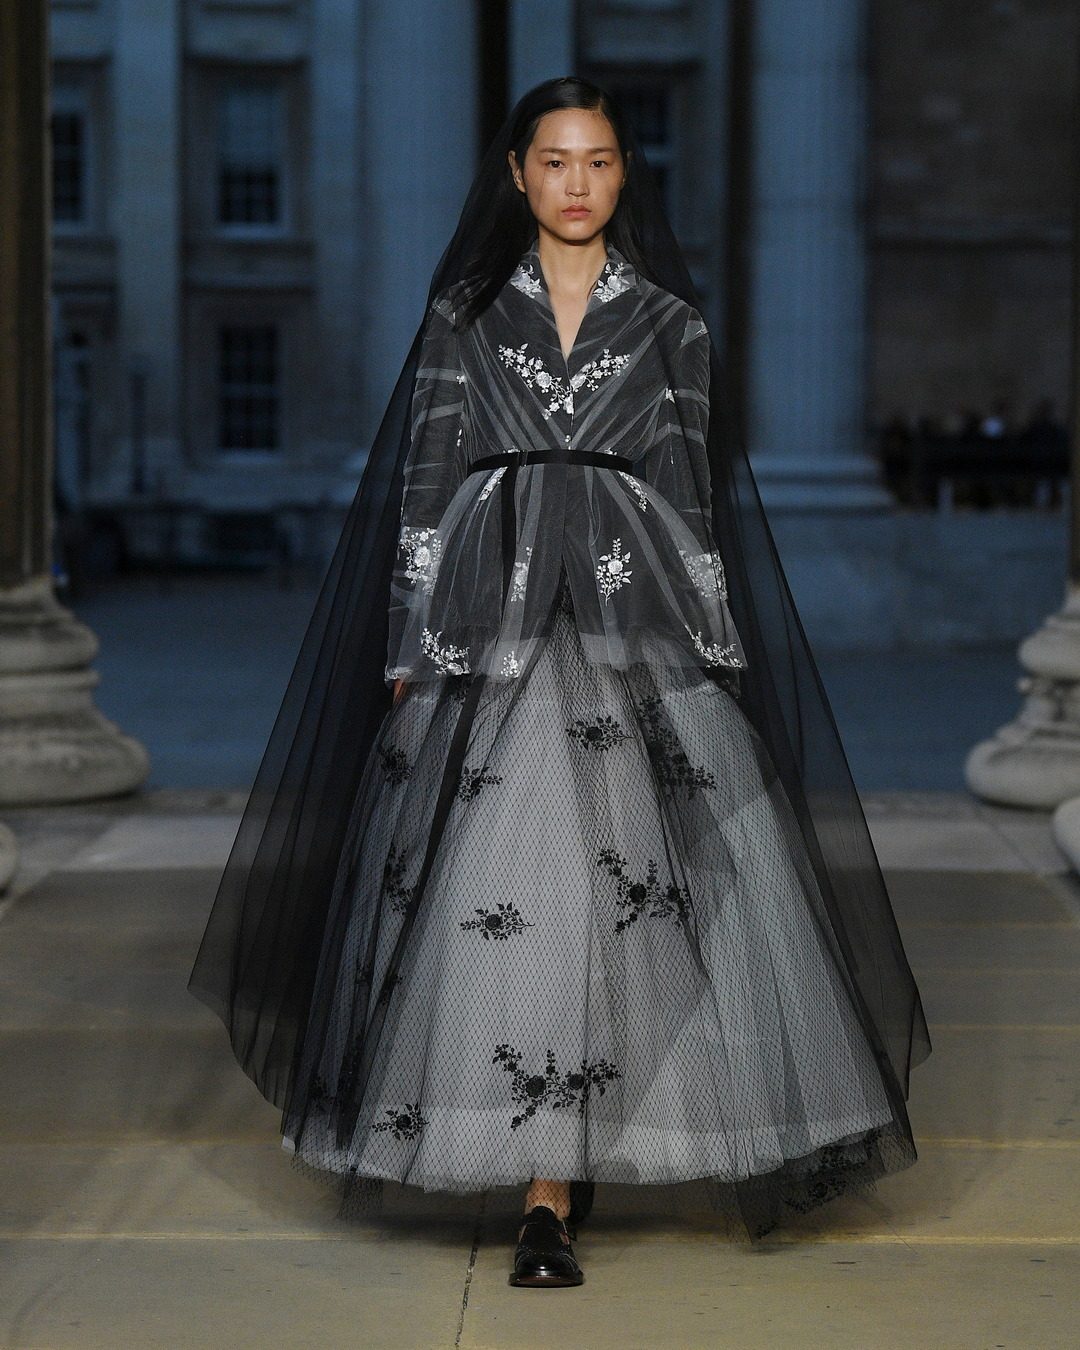 A spring/summer 2023 by Erdem. The start of London Fashion Week coincided with the death of Queen Elizabeth, but while tribute was paid the event carried on regardless. 